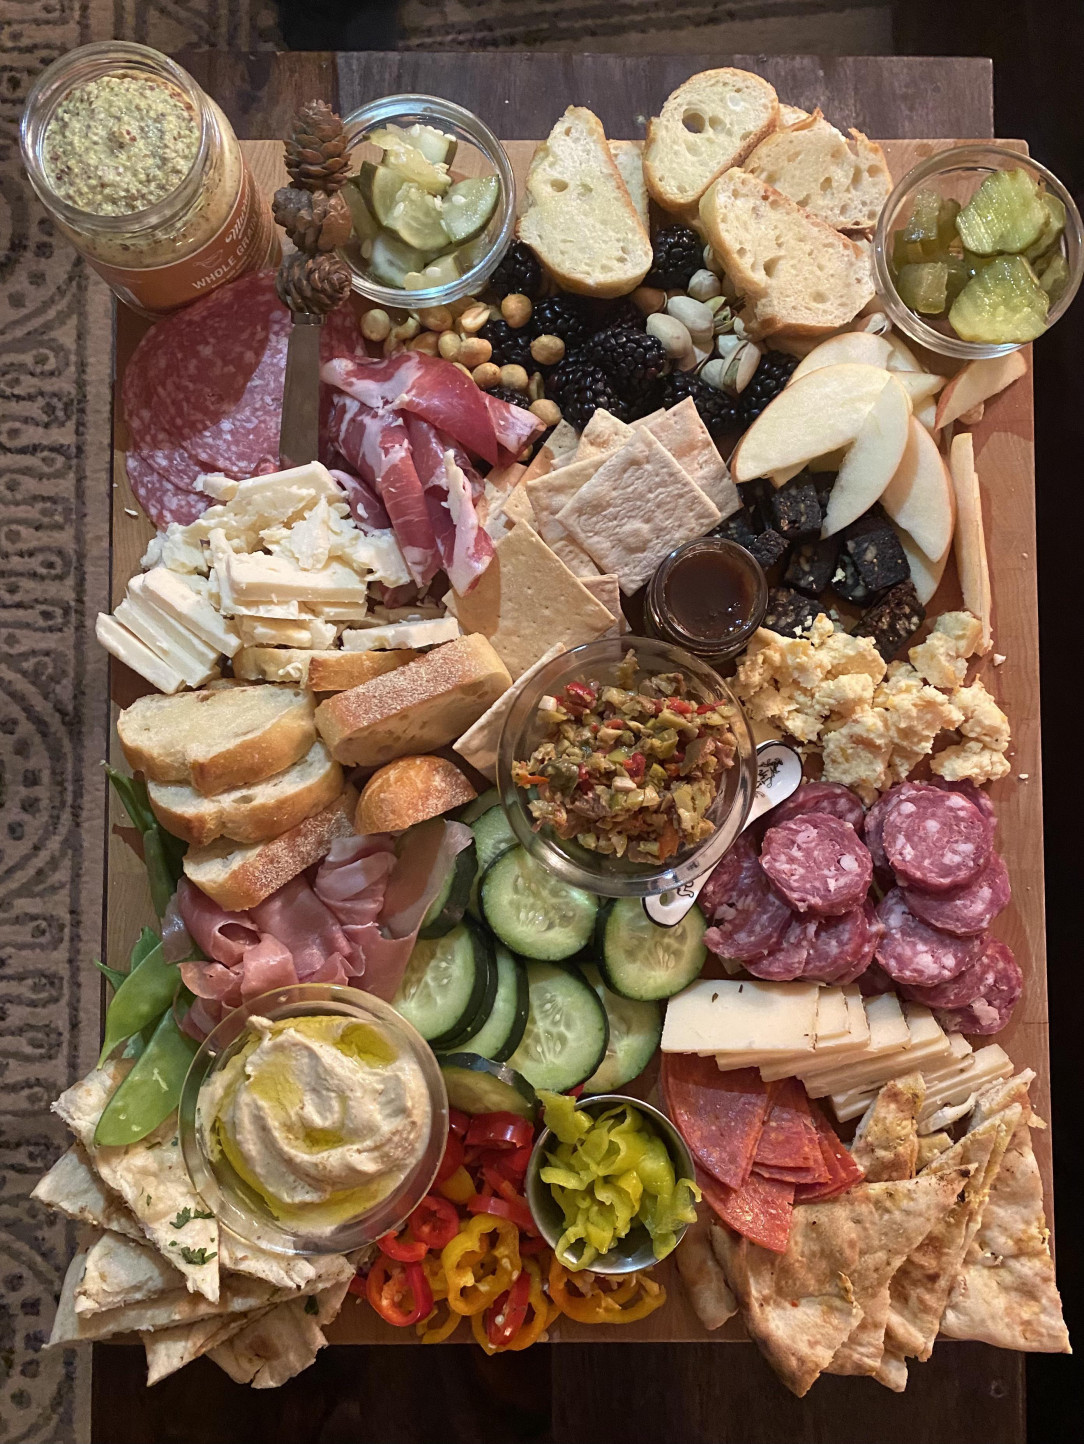 I made a charcuterie board for my birthday